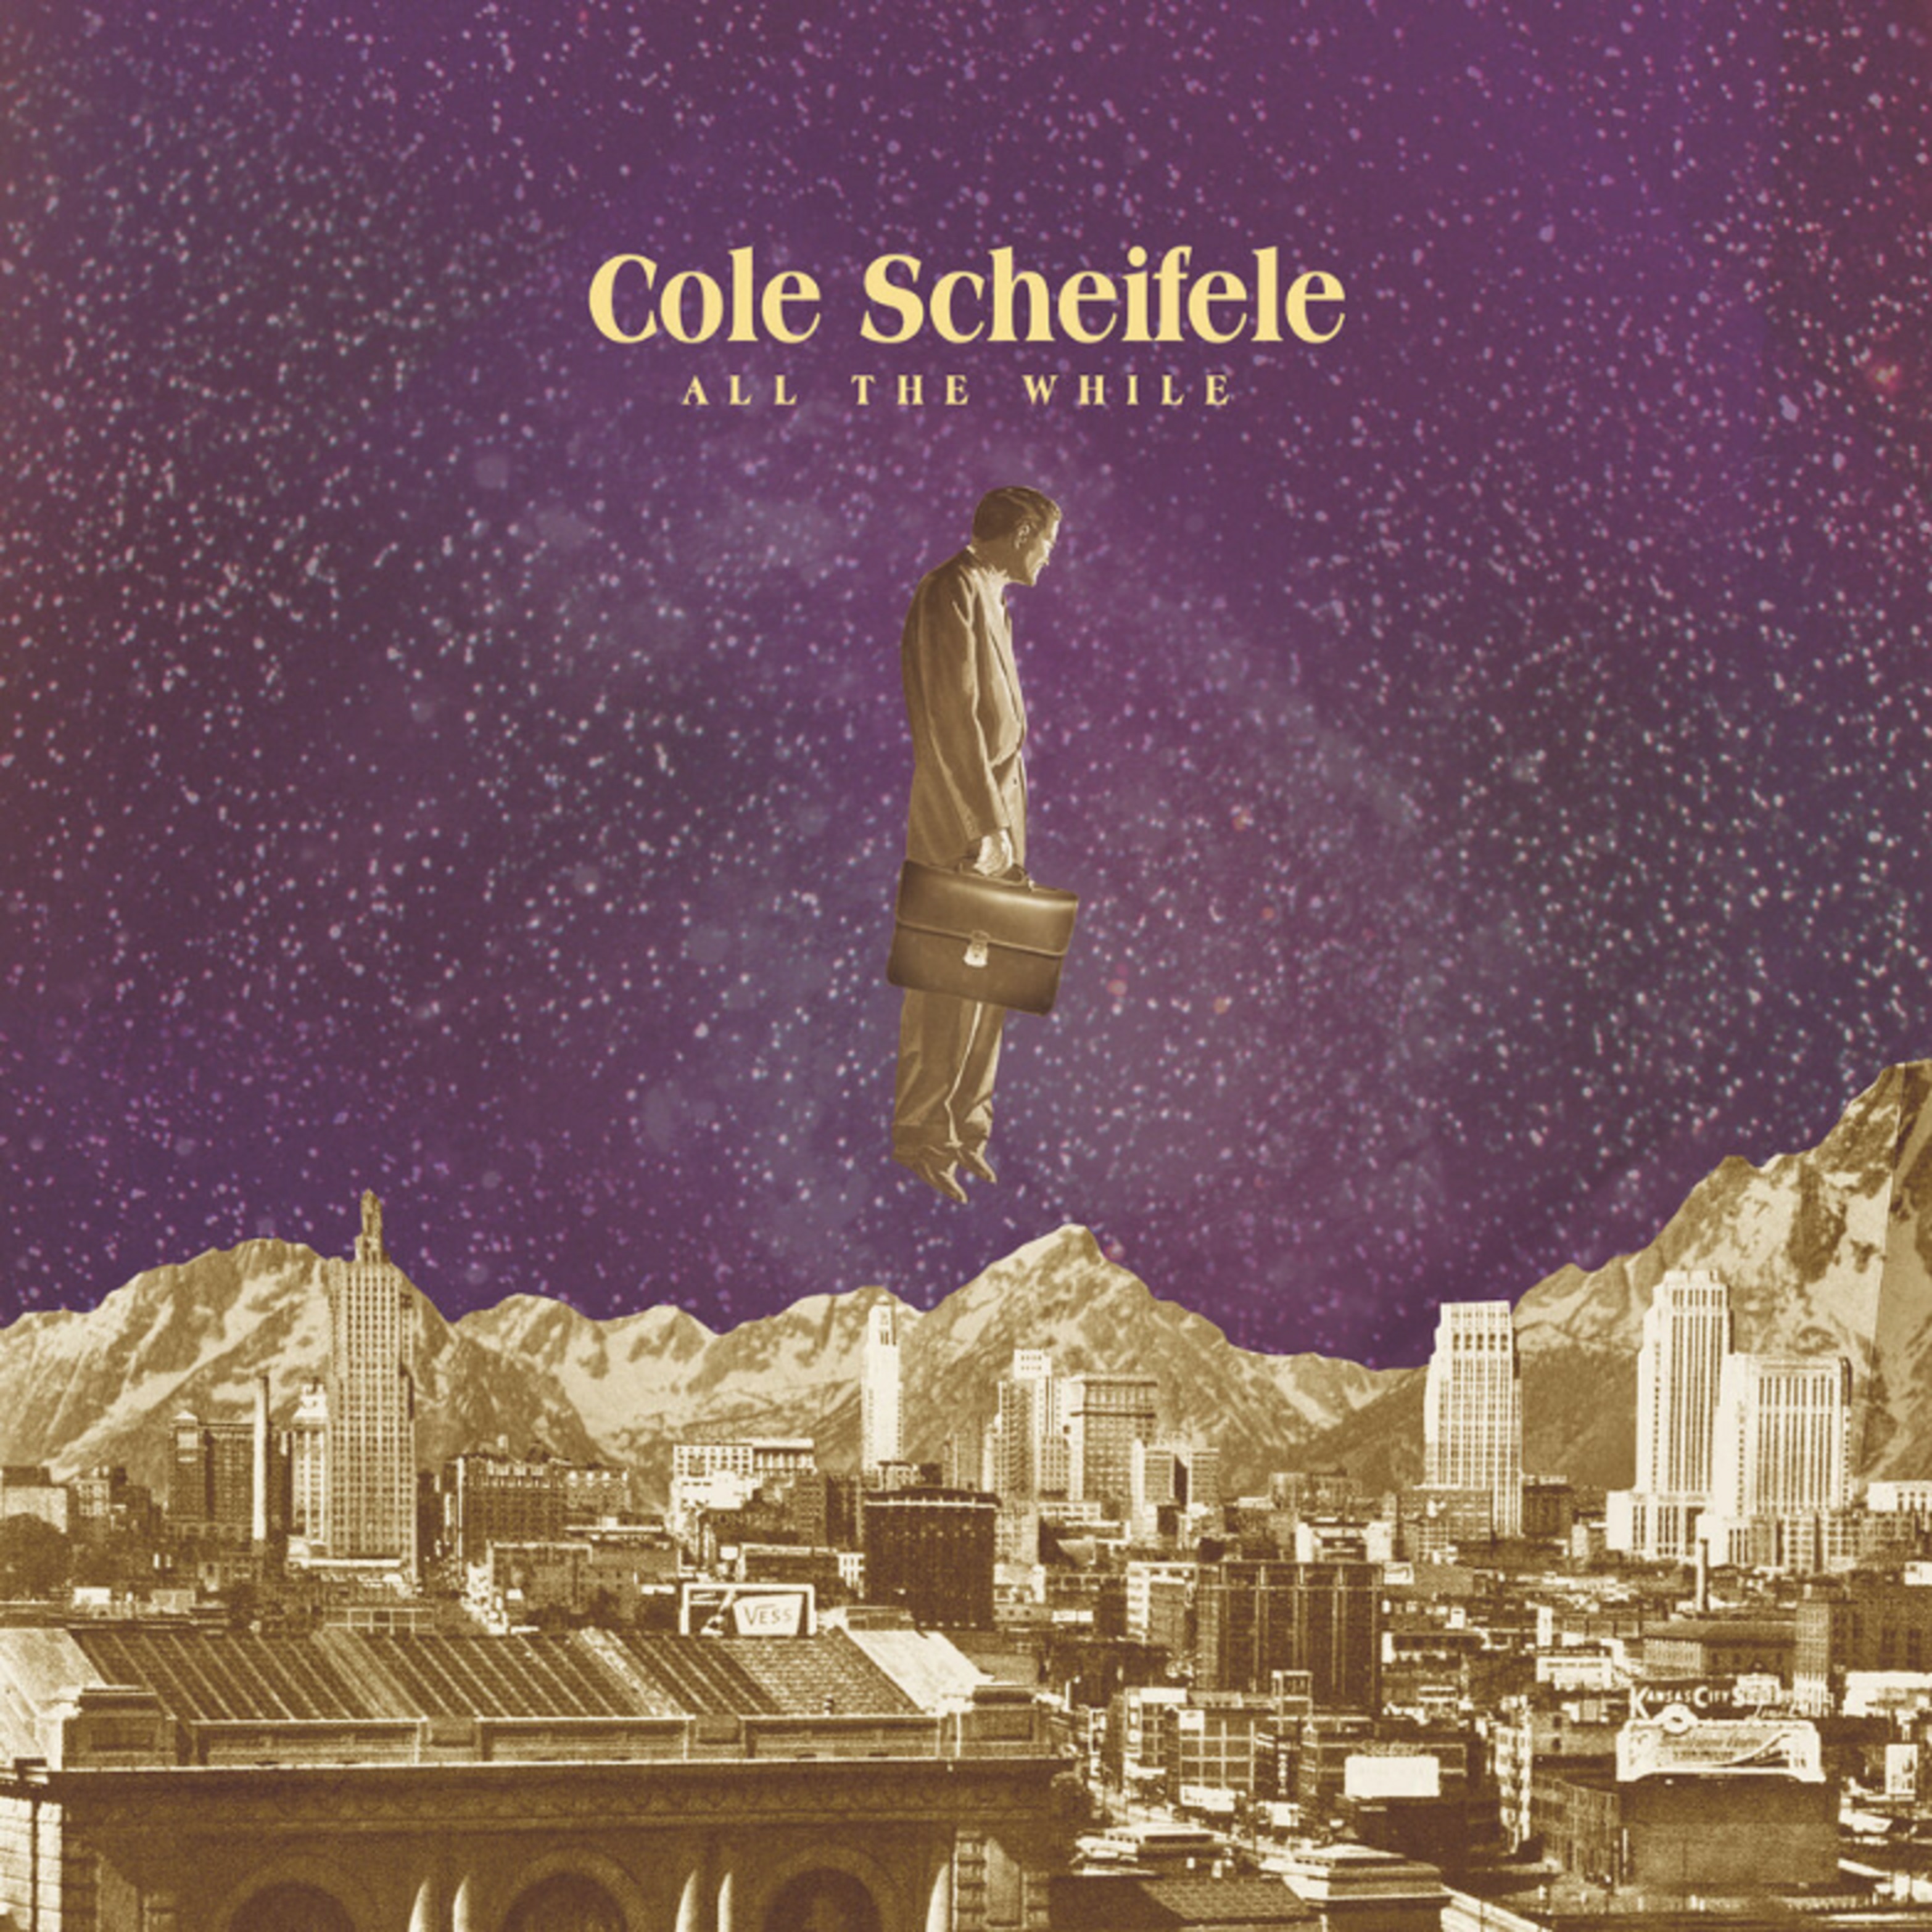 Cole Scheifele Pushes Listeners to Enjoy Life “All The While” There’s Still Time